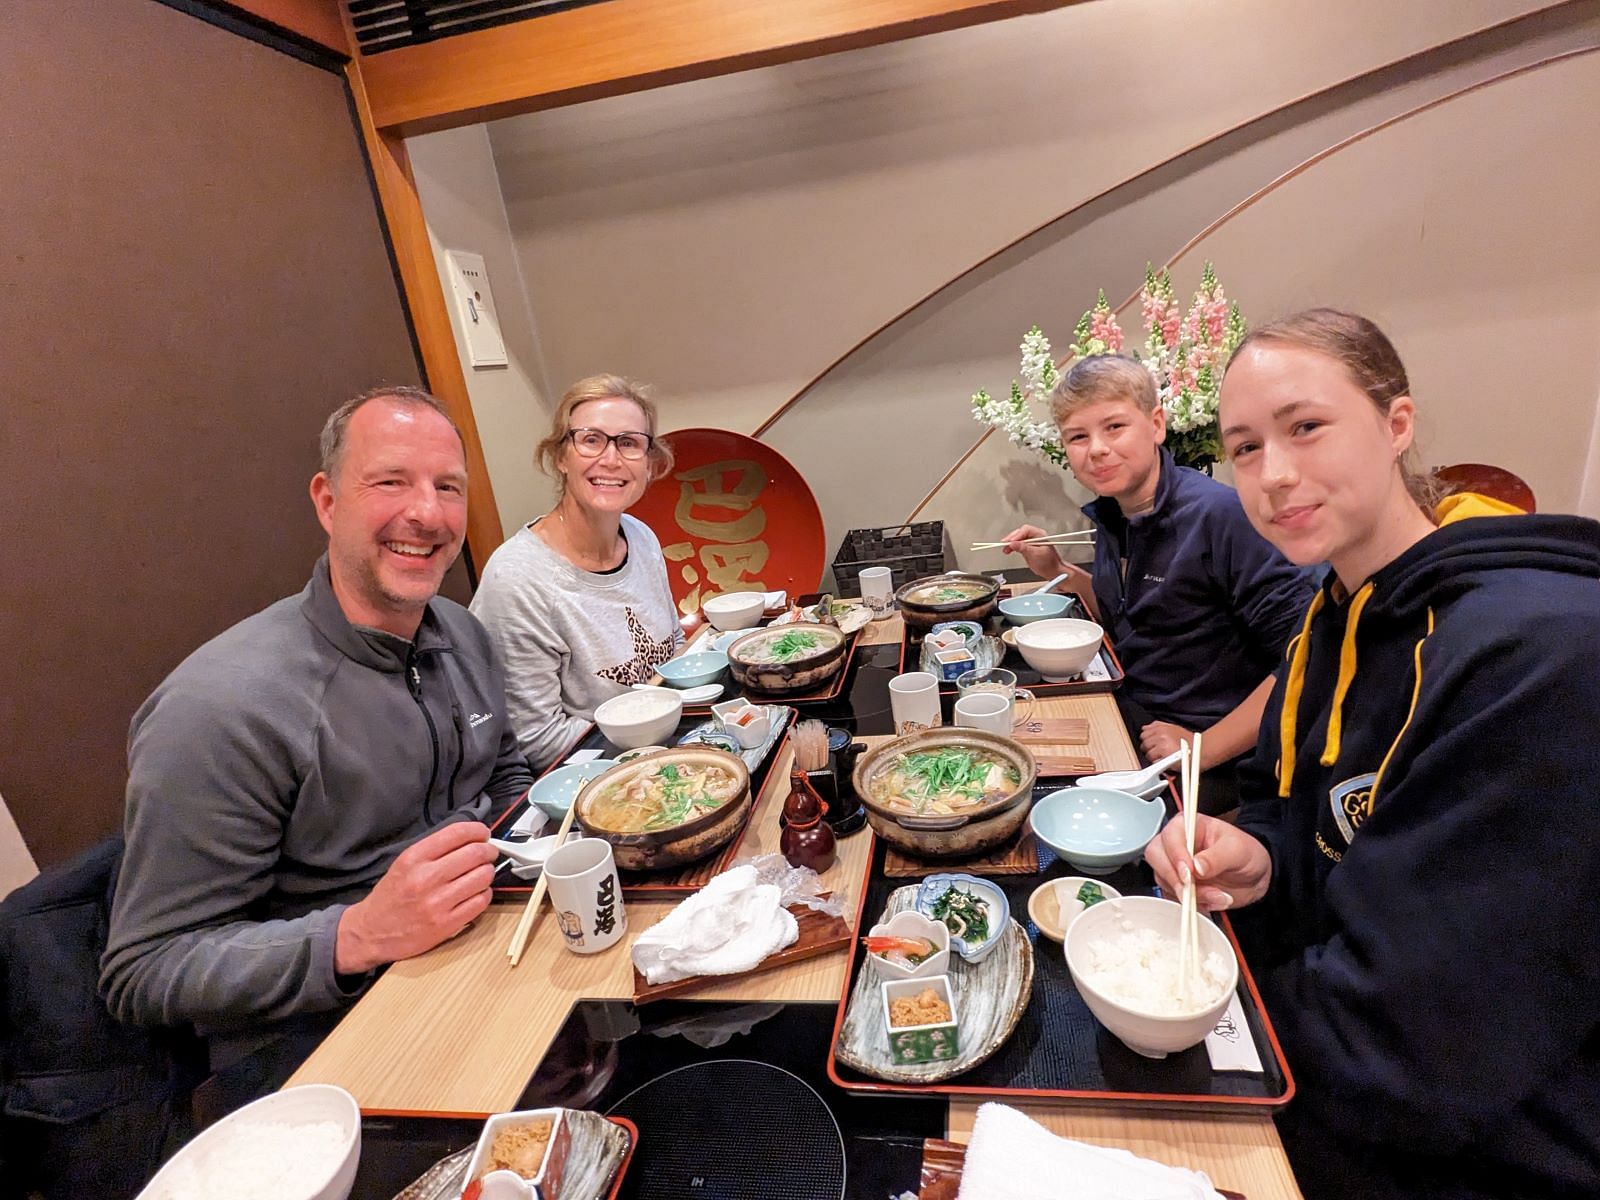 Ryogoku sumo town history / culture and chanko-nabe lunch